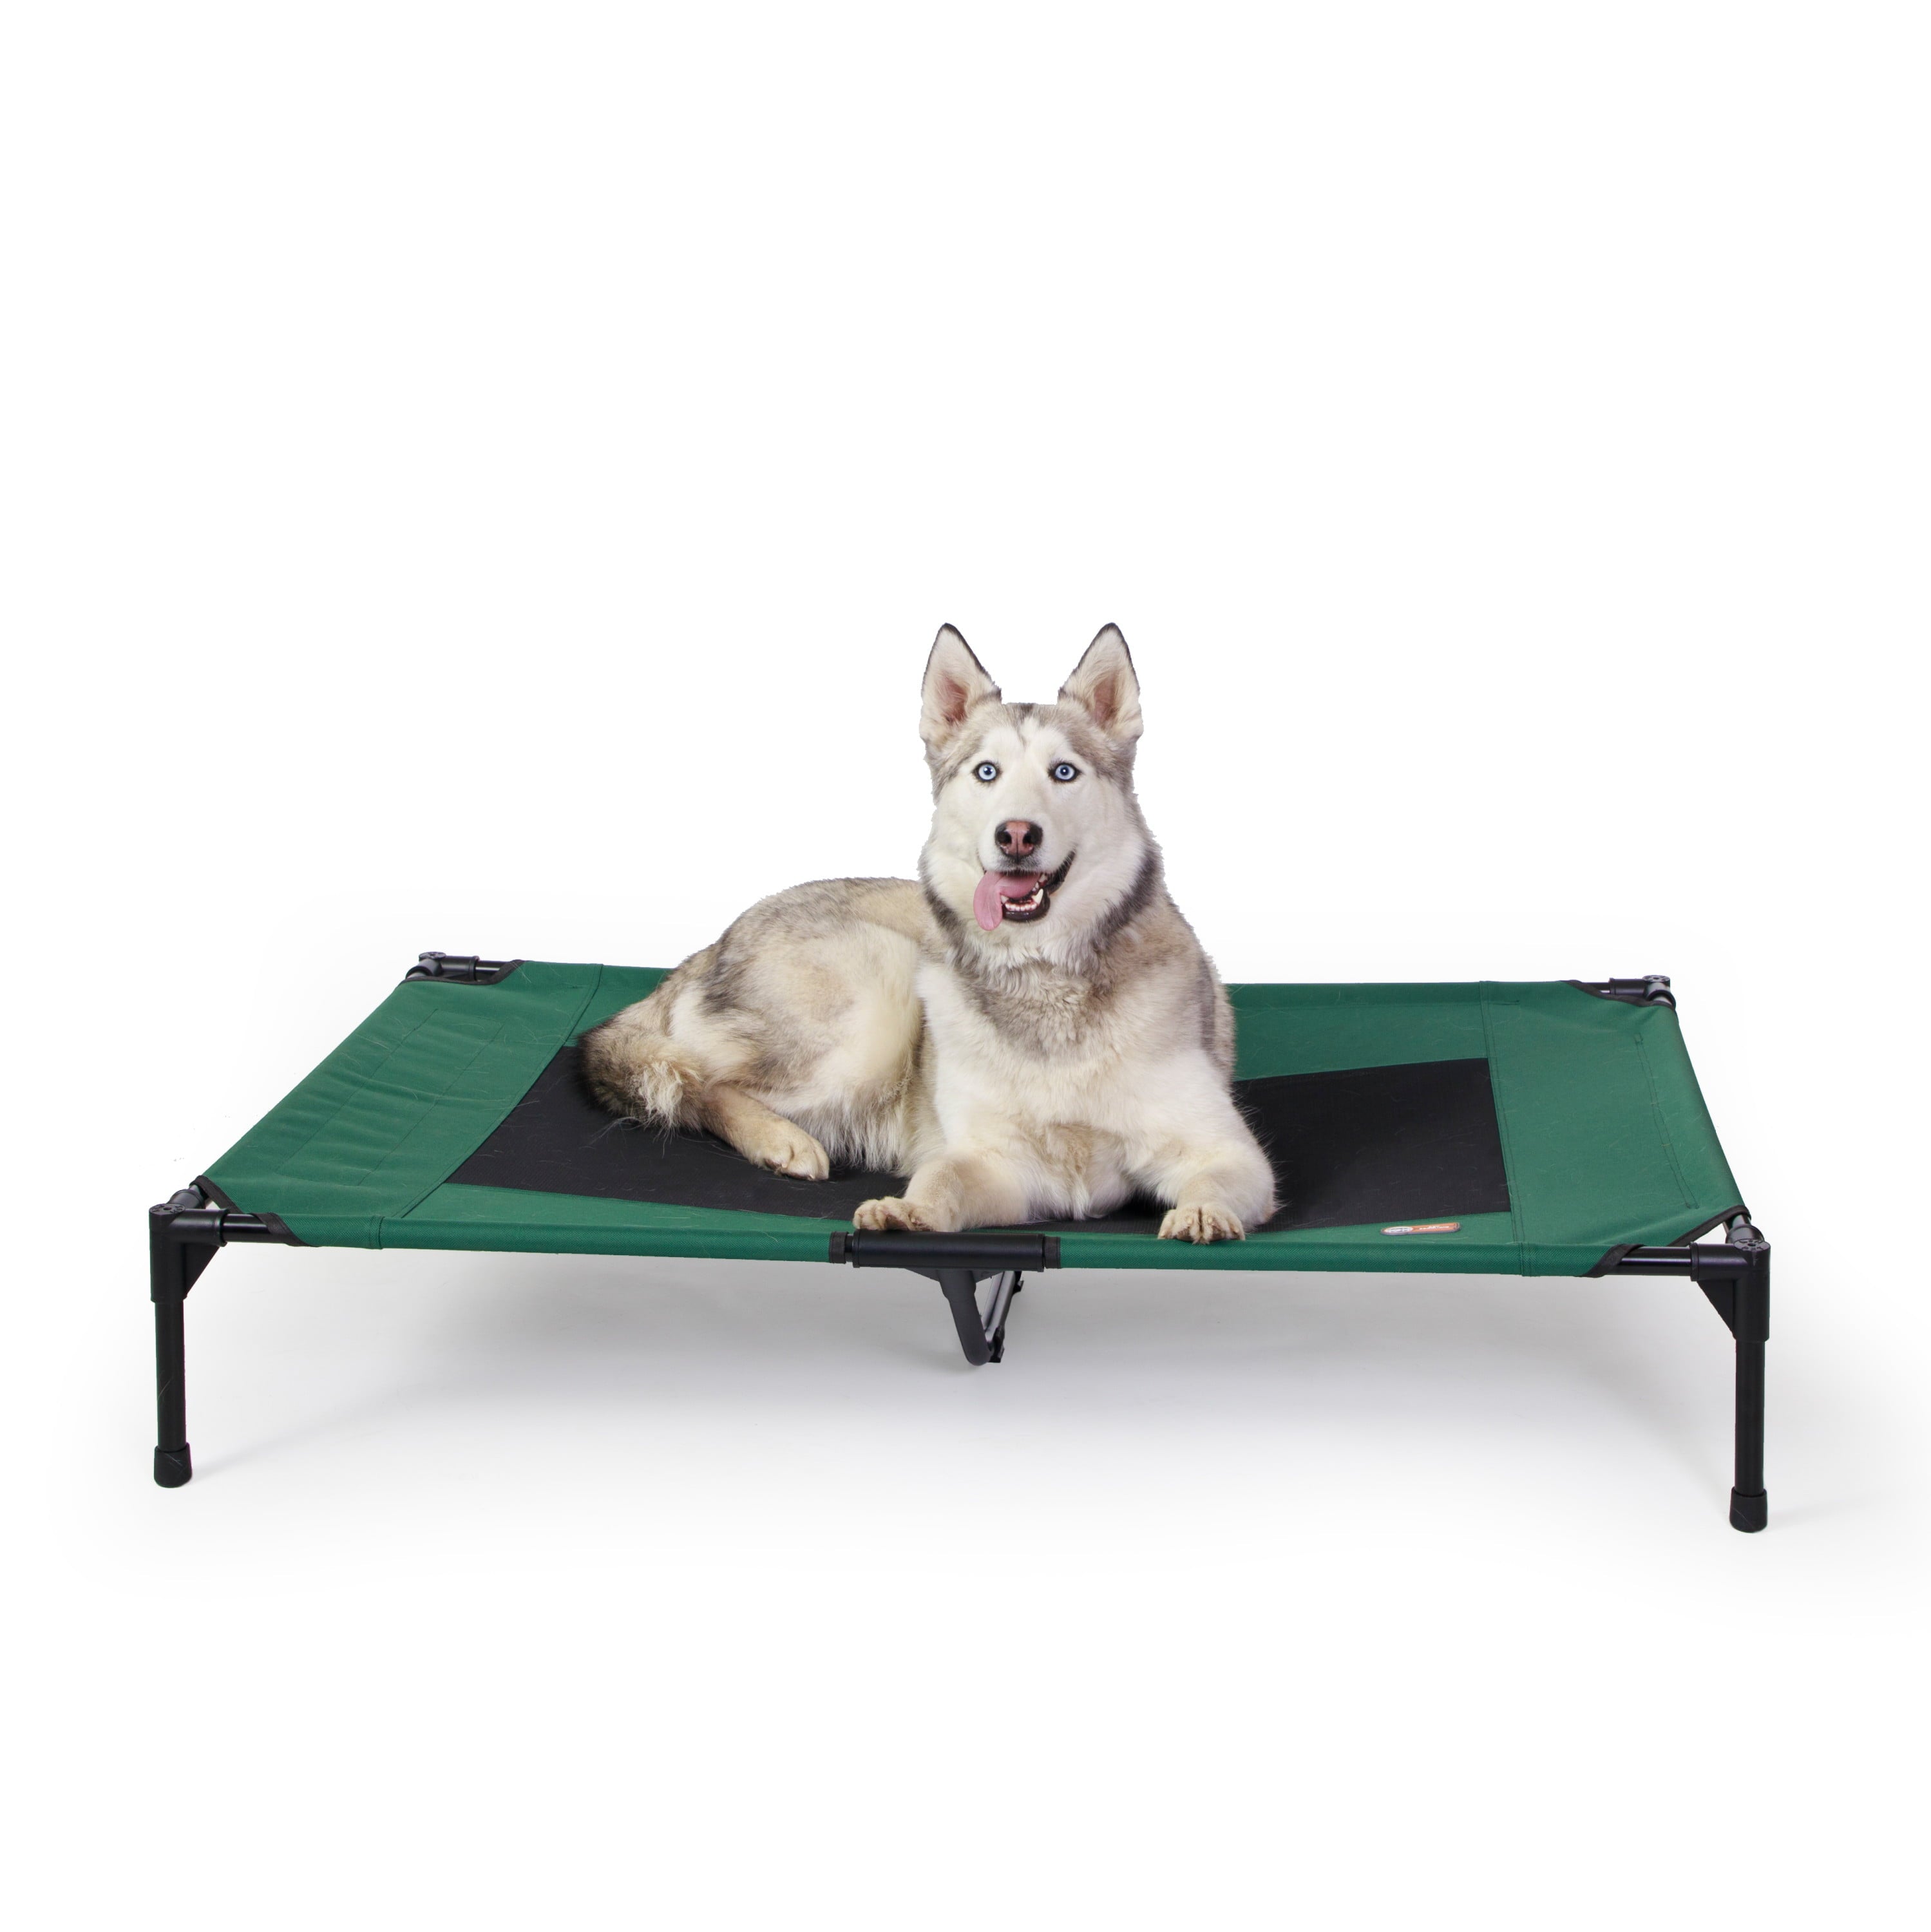 KandH Pet Products Original Pet Cot Elevated Dog Bed Green/Black X-Large 32 X 50 X 9 Inches